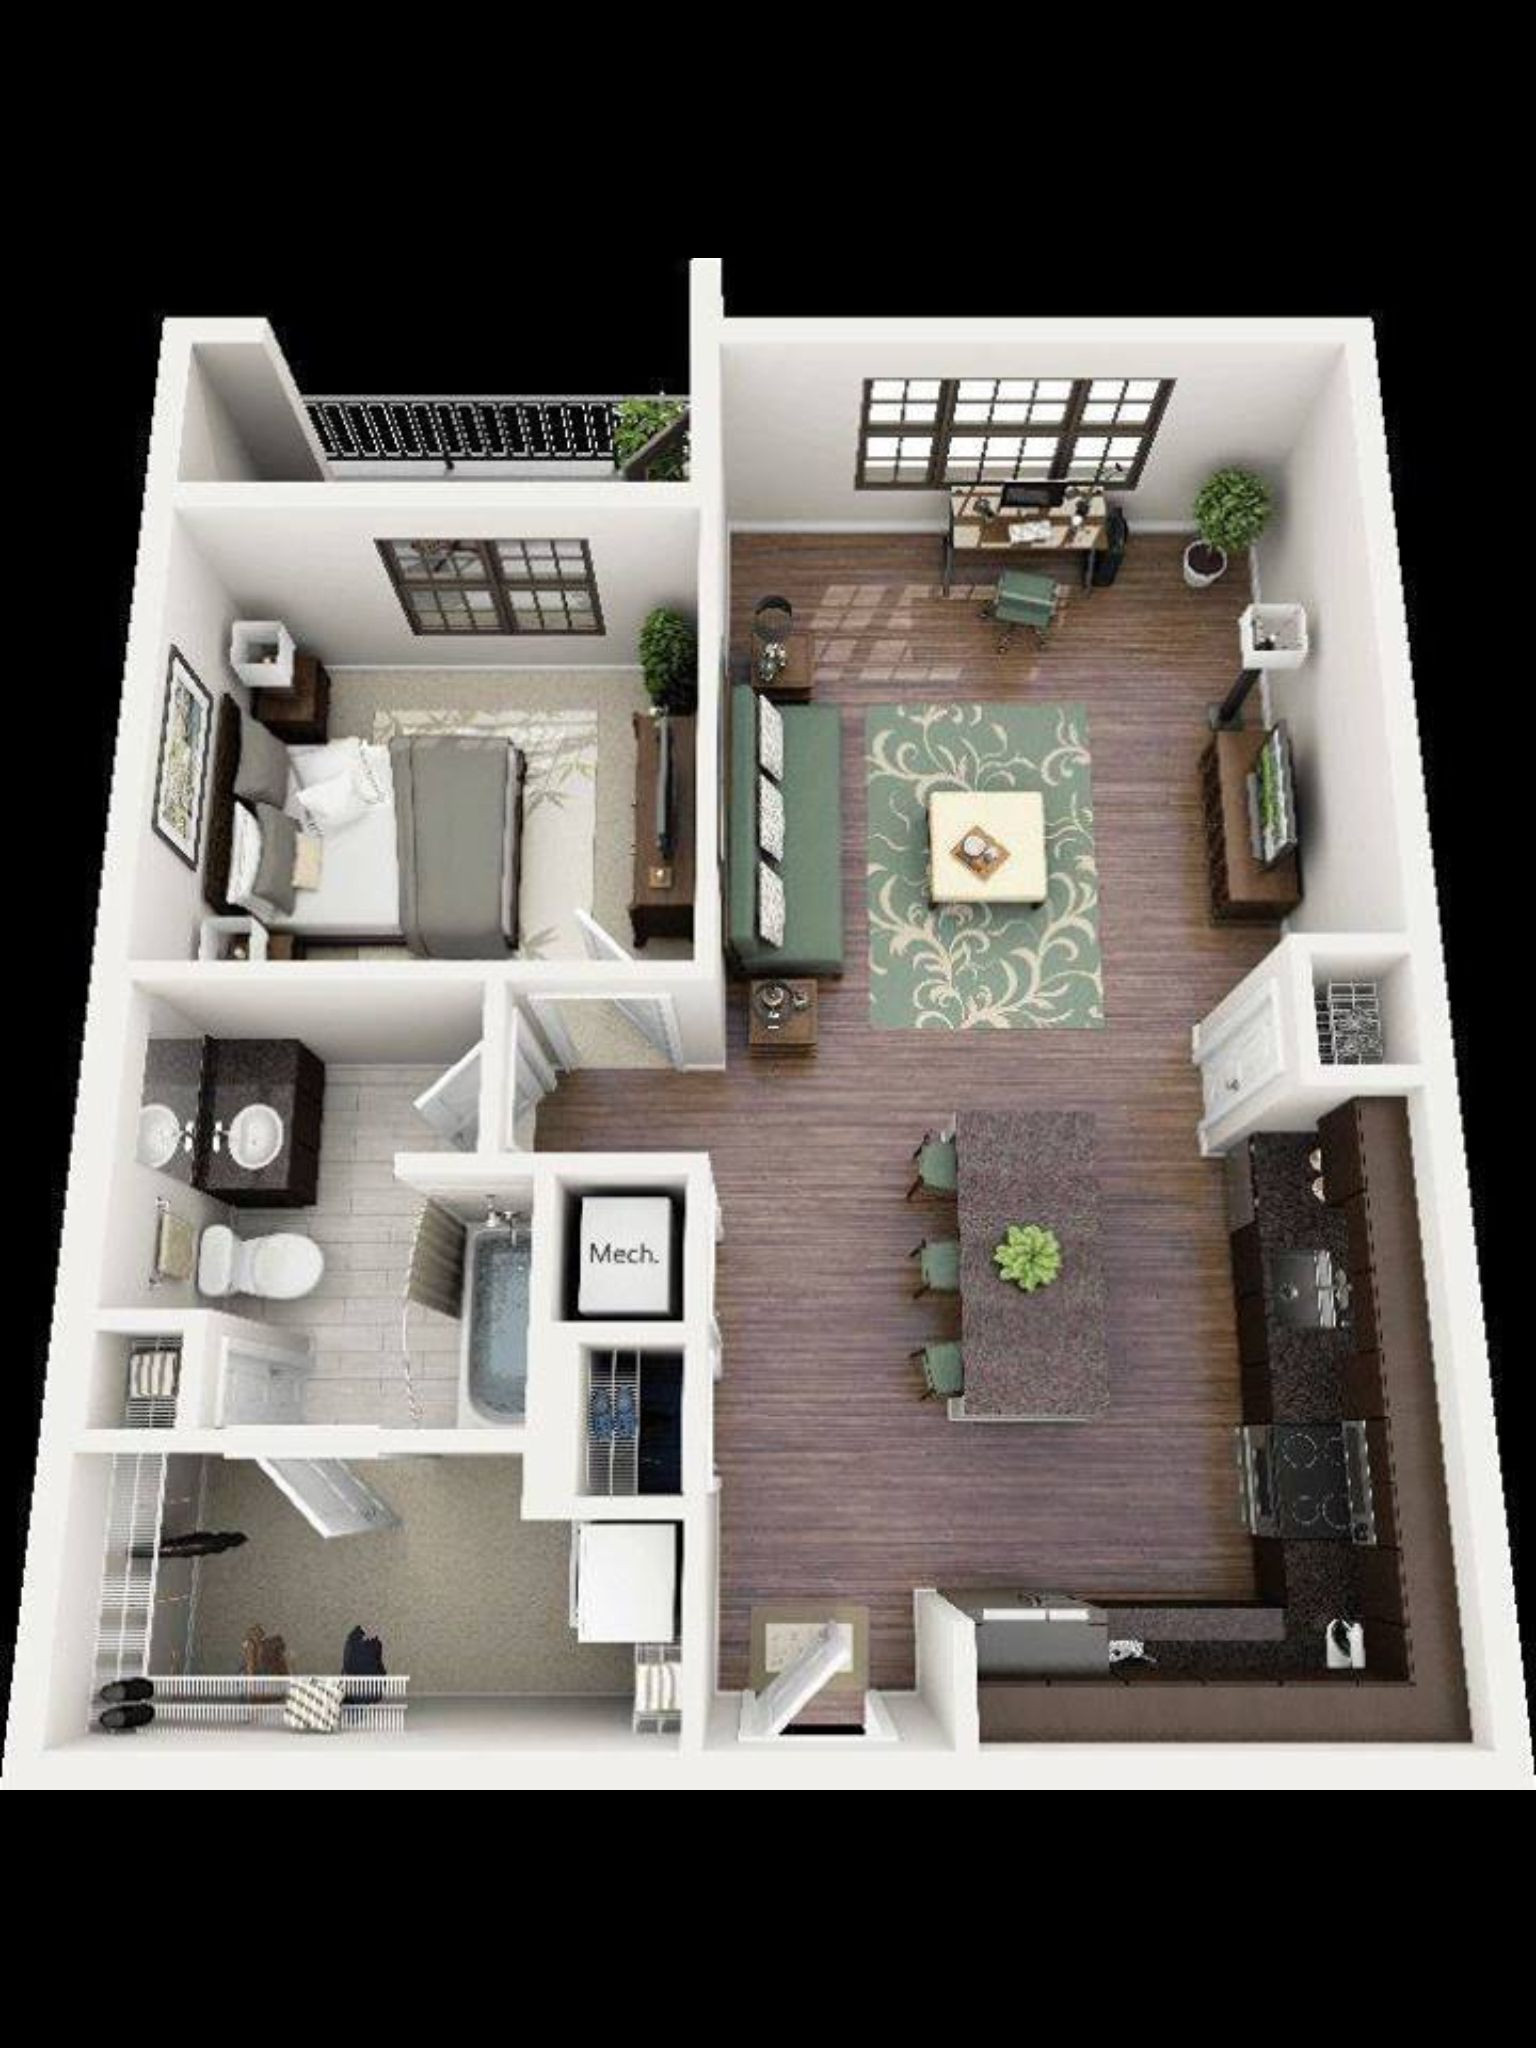 Small 2 Bedroom House
 Very nice and fortable planning of the apartment